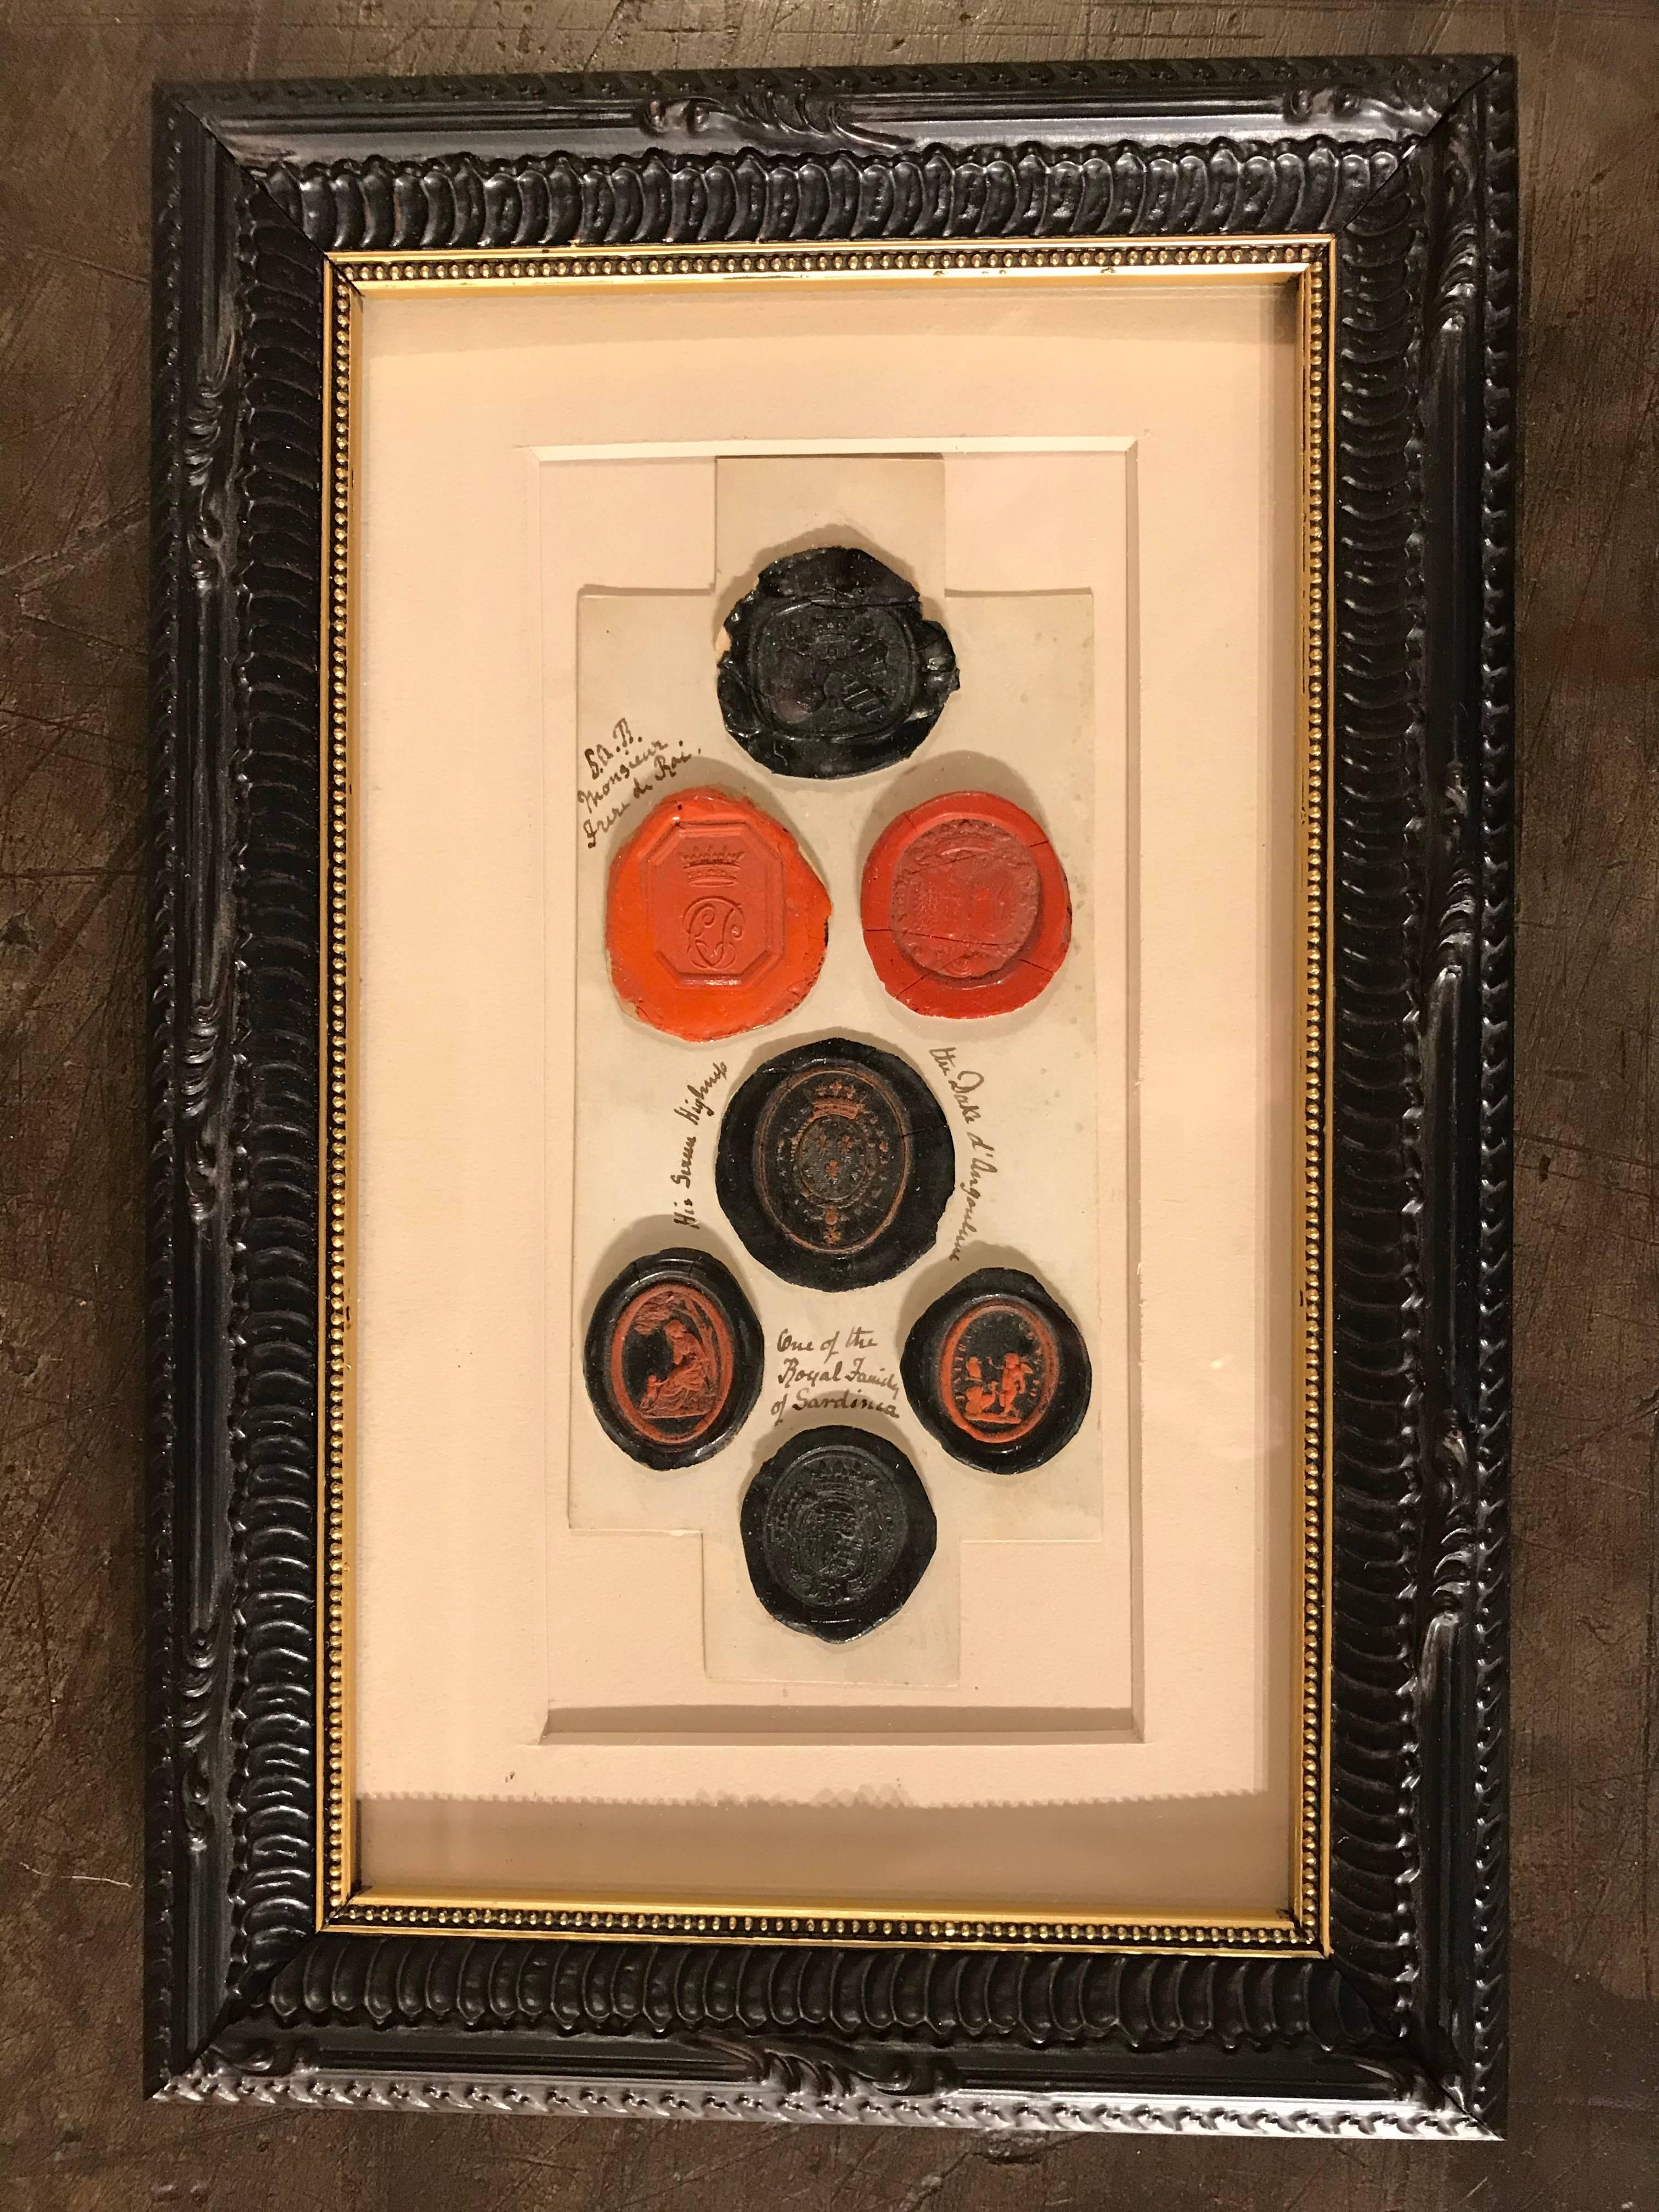 A framed pair of very interesting red and black wax intaglios seals with some inscriptions. Some are royal seals and all are beautiful impressions. The black seals with red highlights particularly unusual and intriguing. Mostly French and Italian.